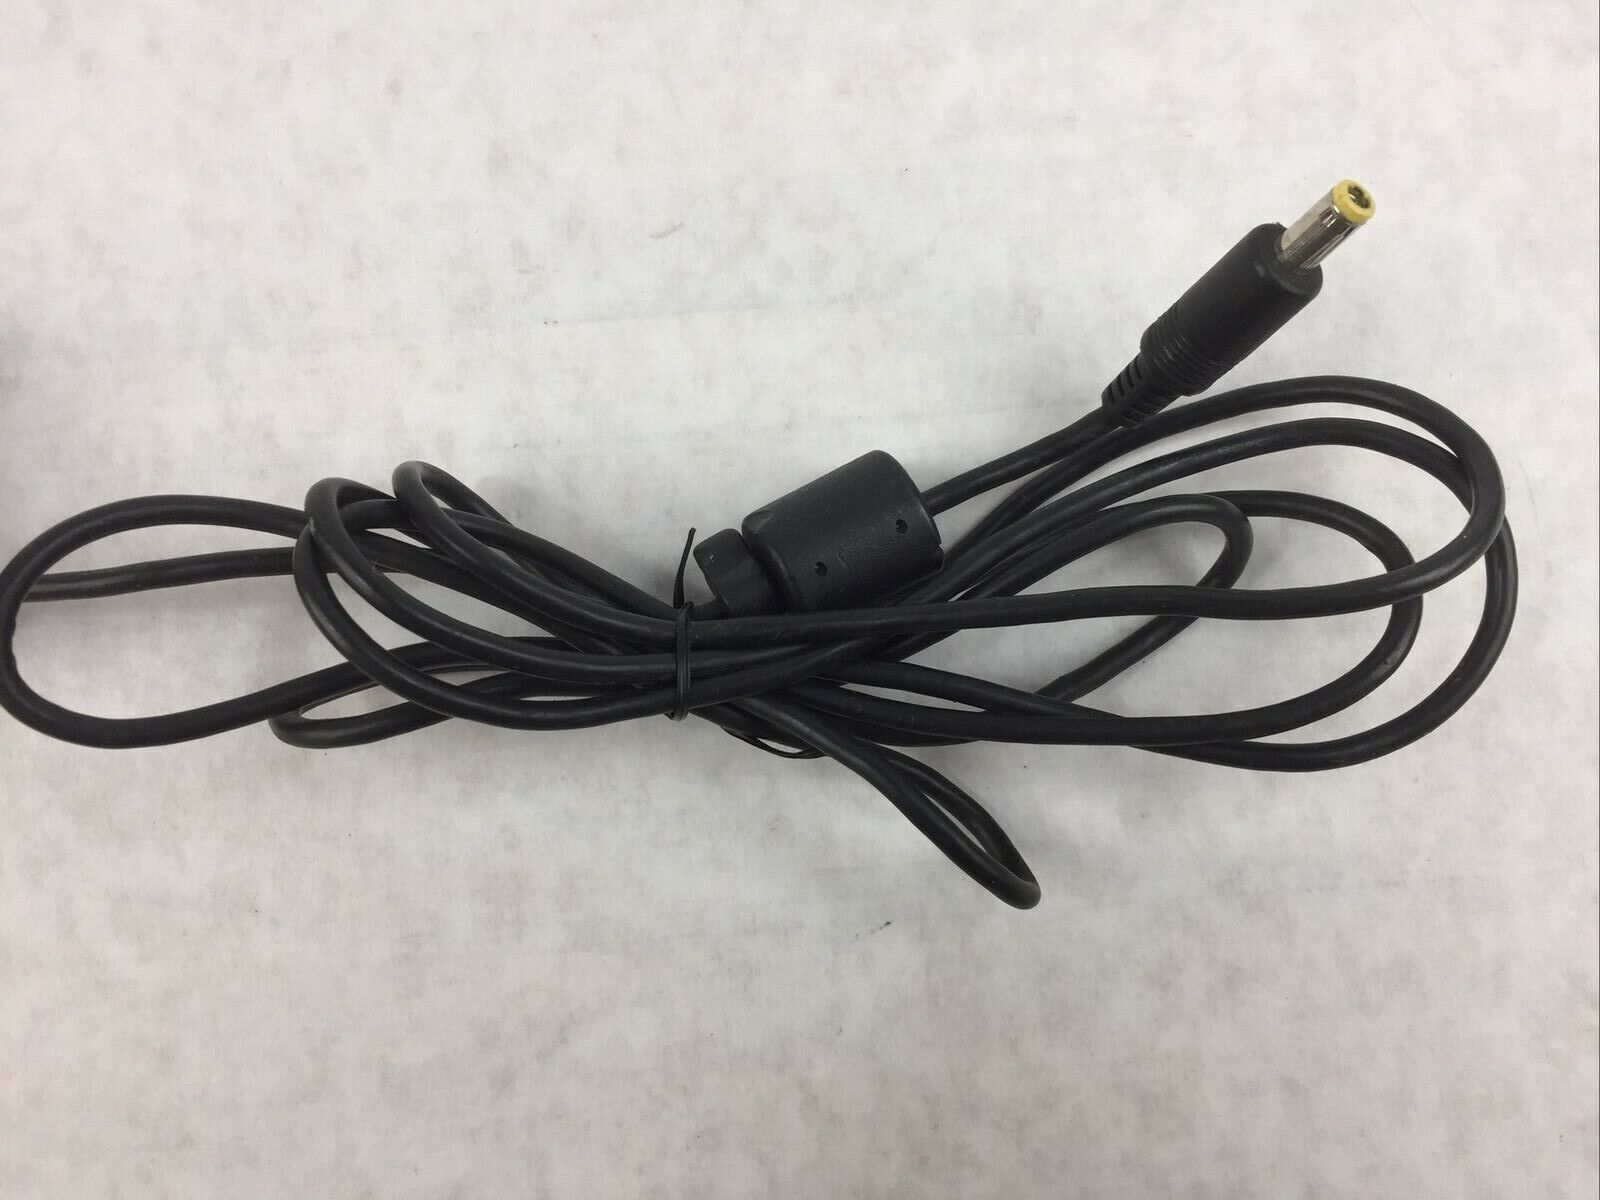 Dell Laptop Charger AC Adapter Power Supply ADP-60NH B PA-16  60W